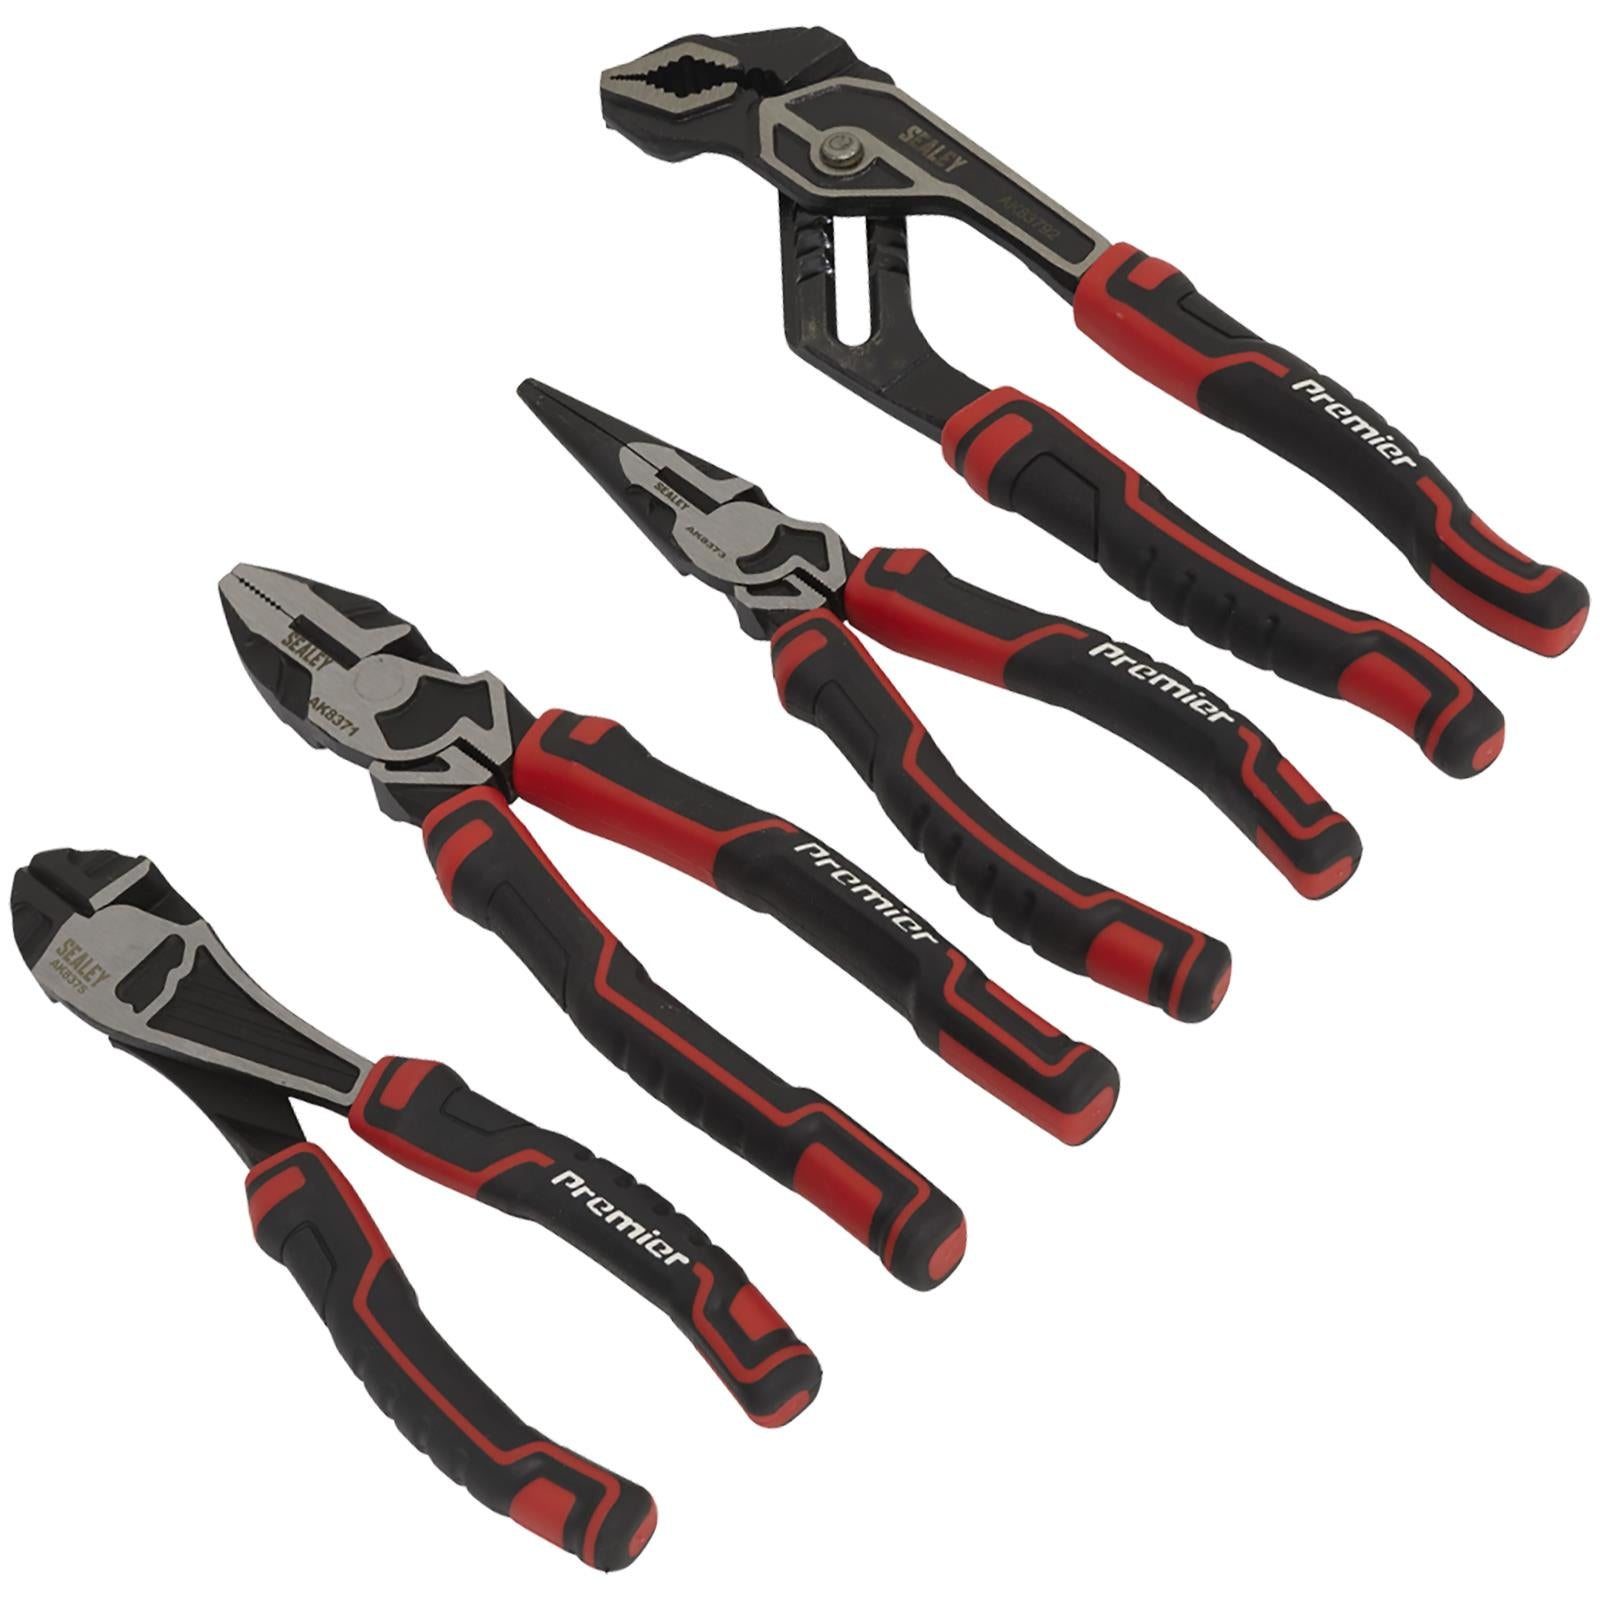 Sealey Pliers Set High Leverage 4 Piece Side Cutters Combination Long Nose Water Pump